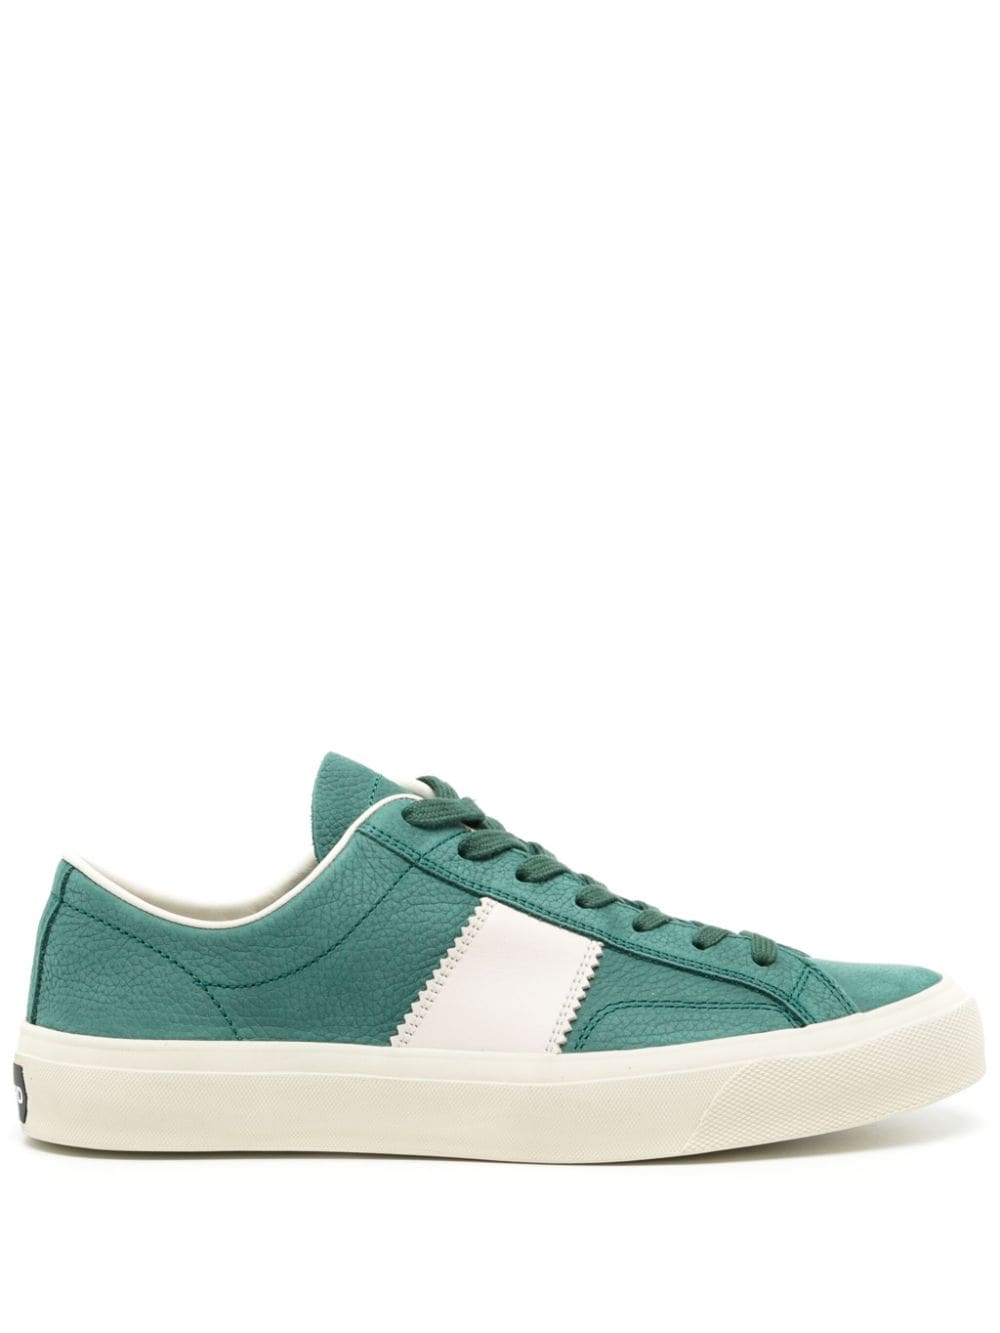 TOM FORD Cambridge leather sneakers - Green von TOM FORD